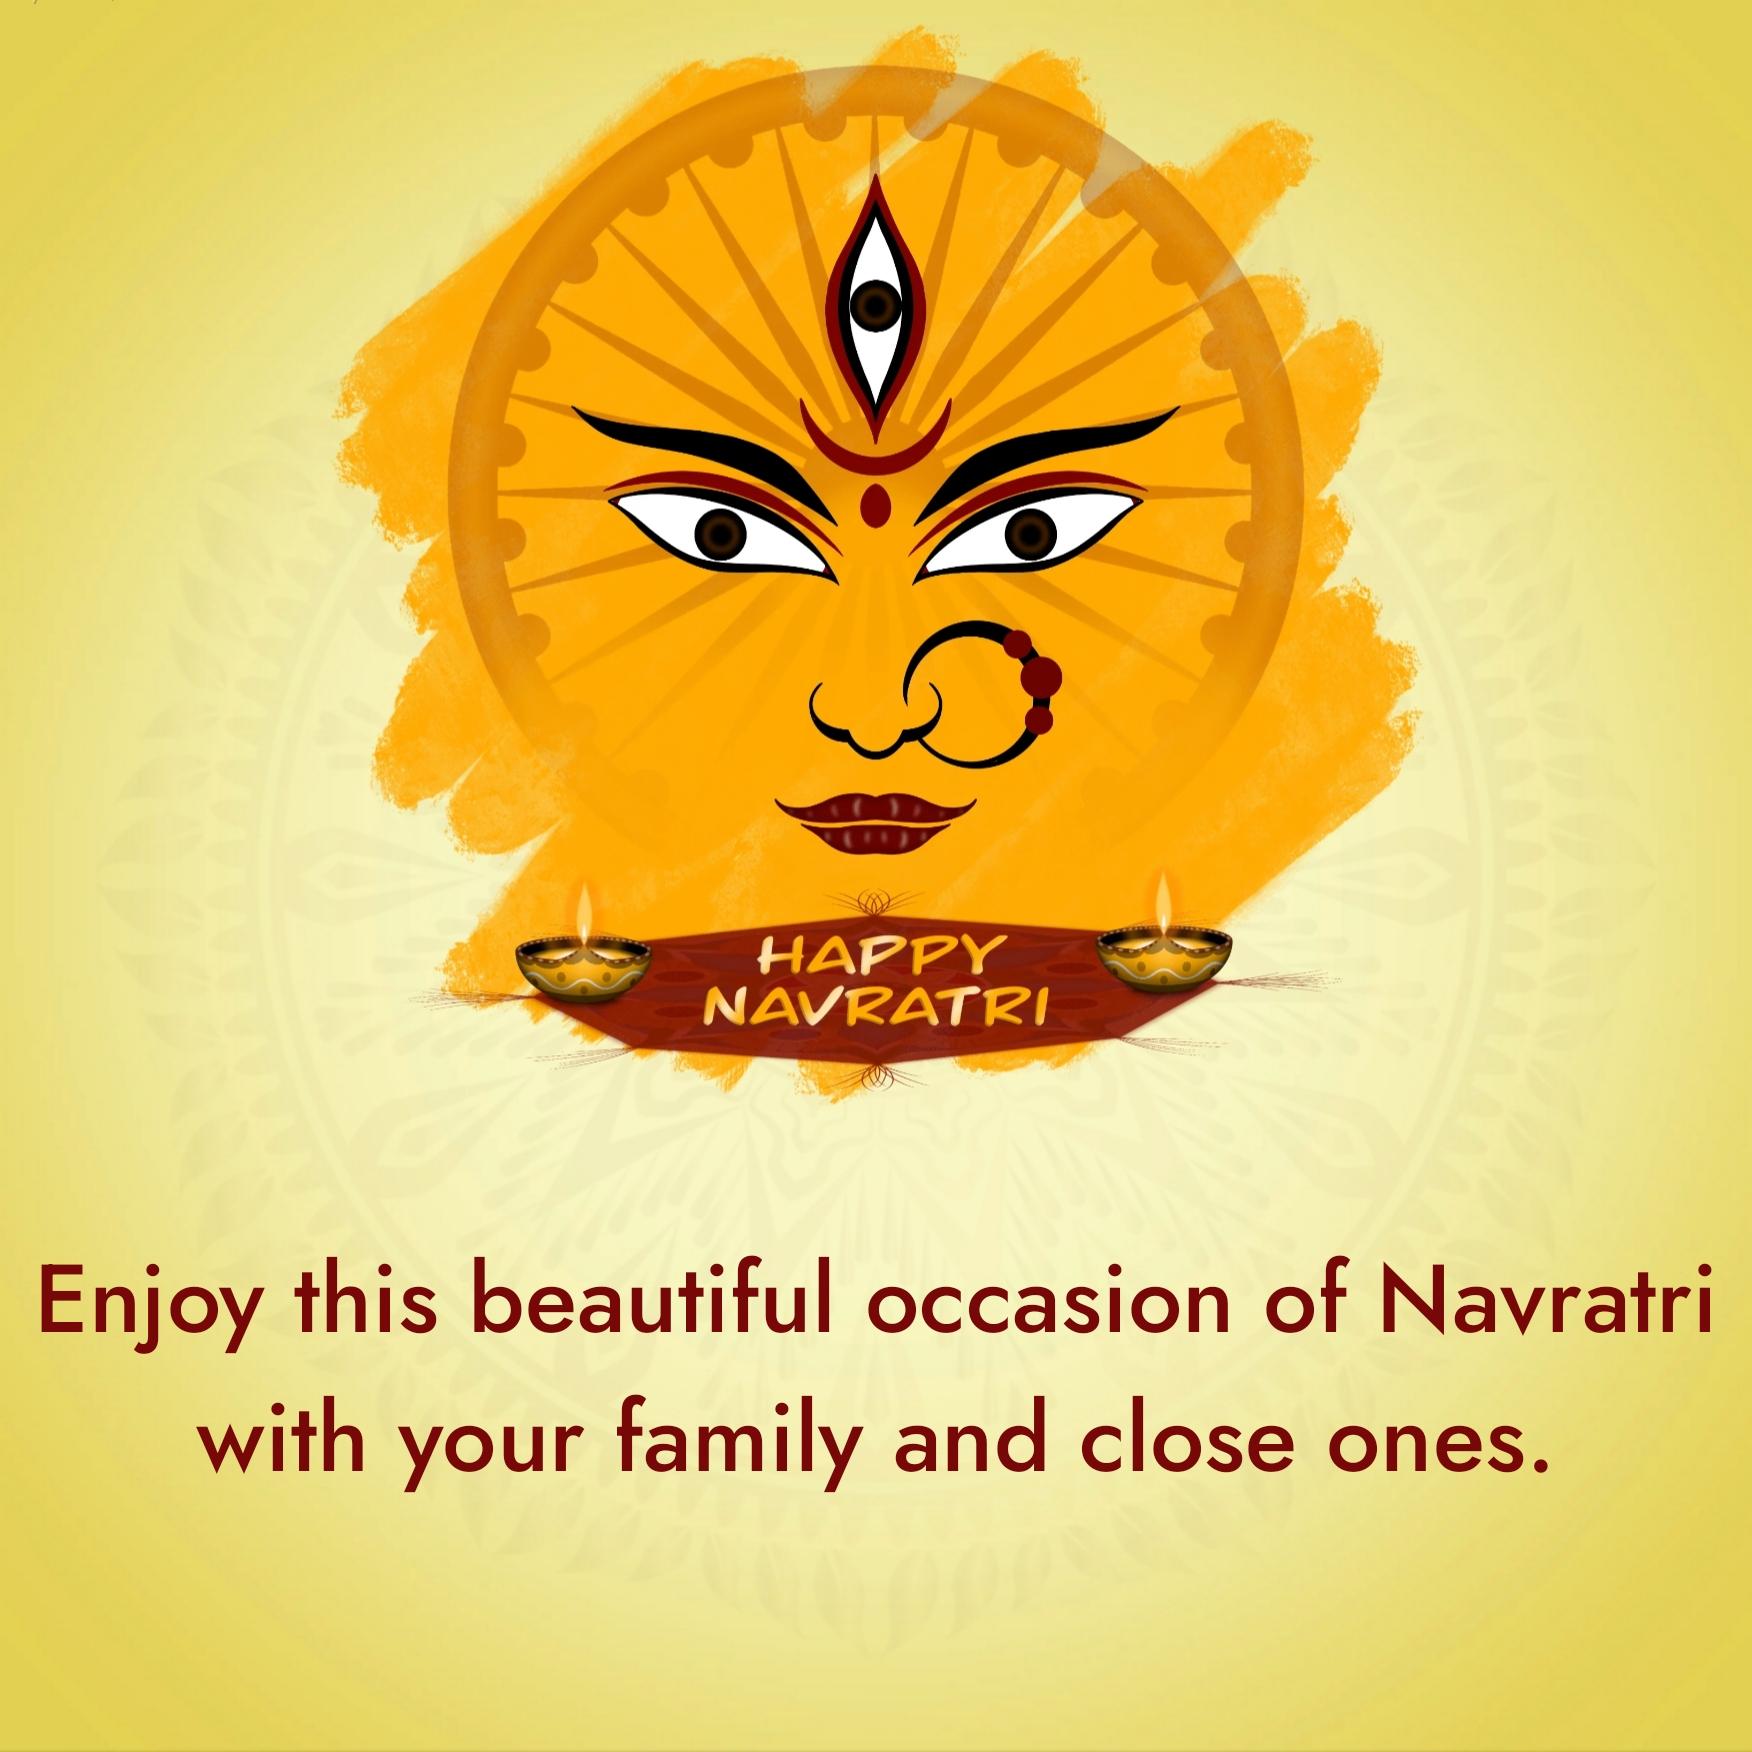 Enjoy this beautiful occasion of Navratri with your family